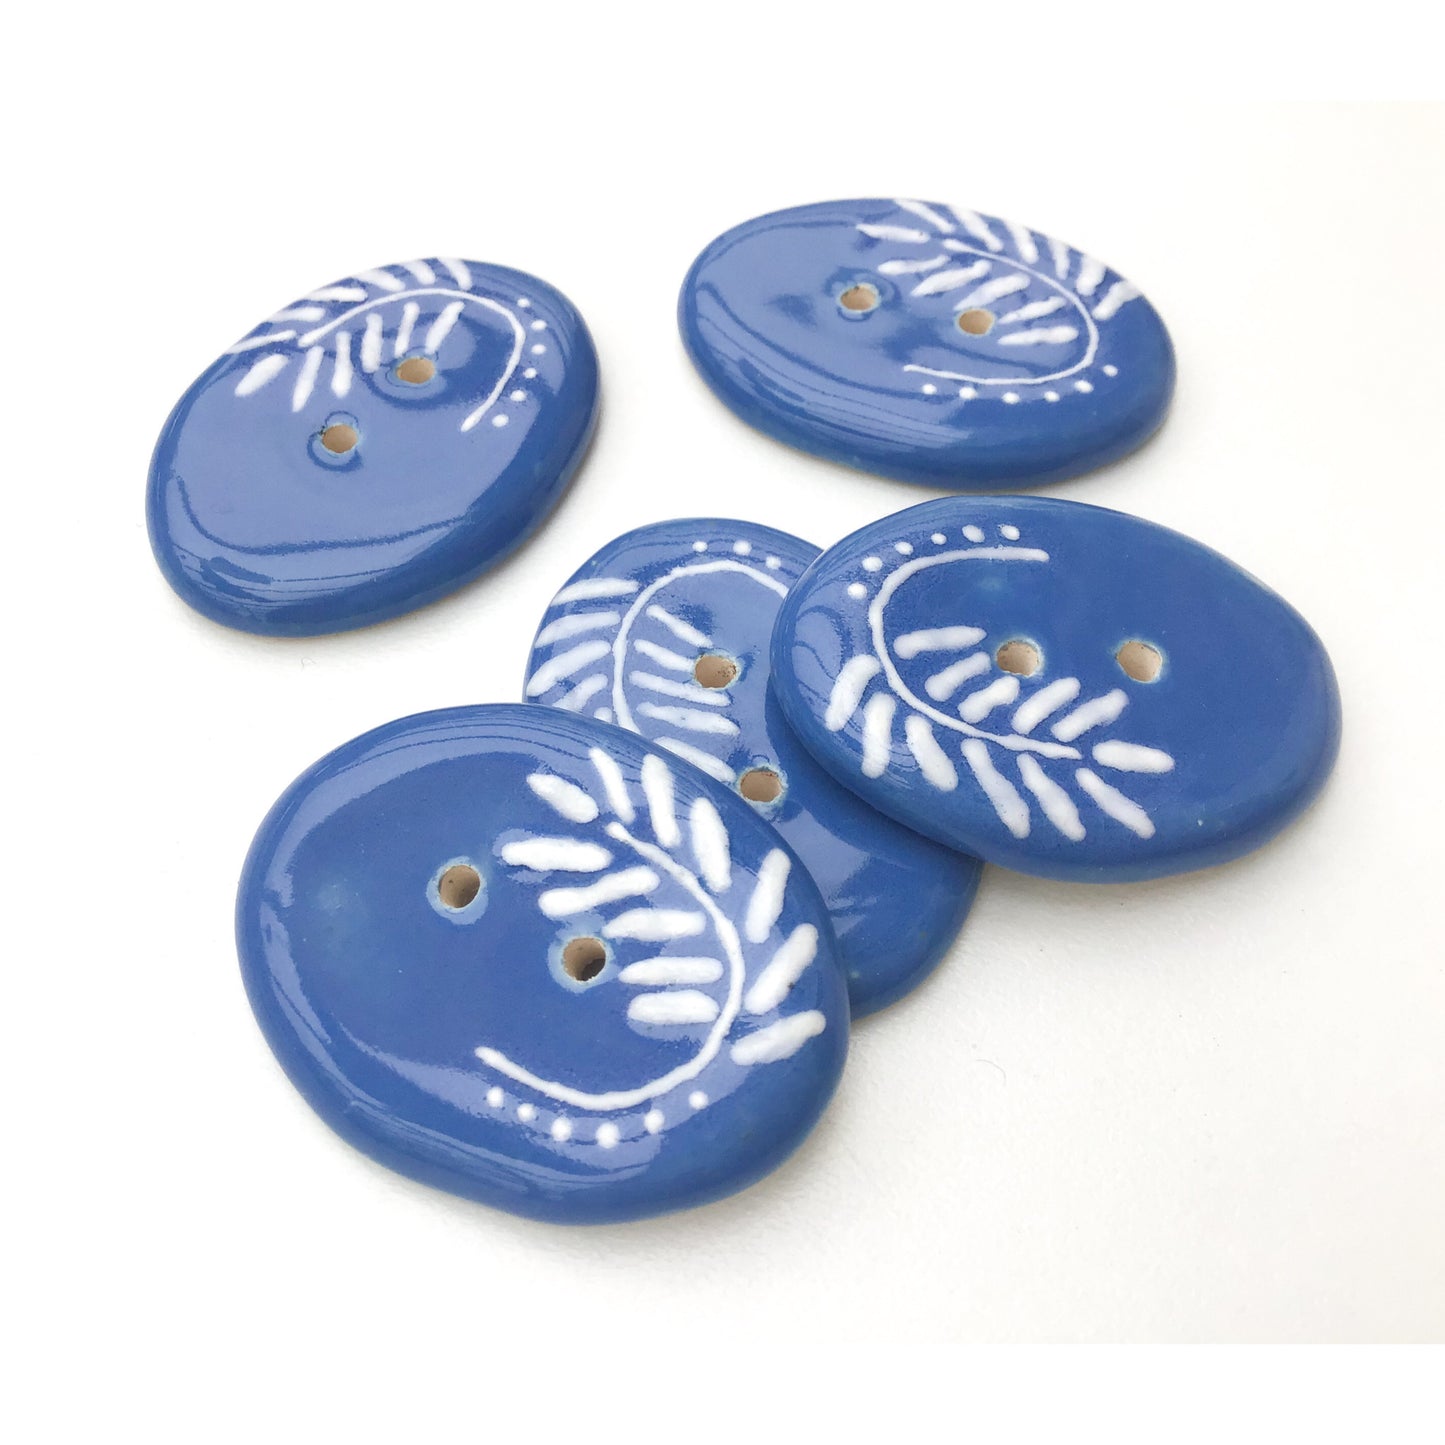 Cerulean Blue Ceramic Buttons with White Design - Large Oval Button - 1" x 1 3/8" (ws-41)